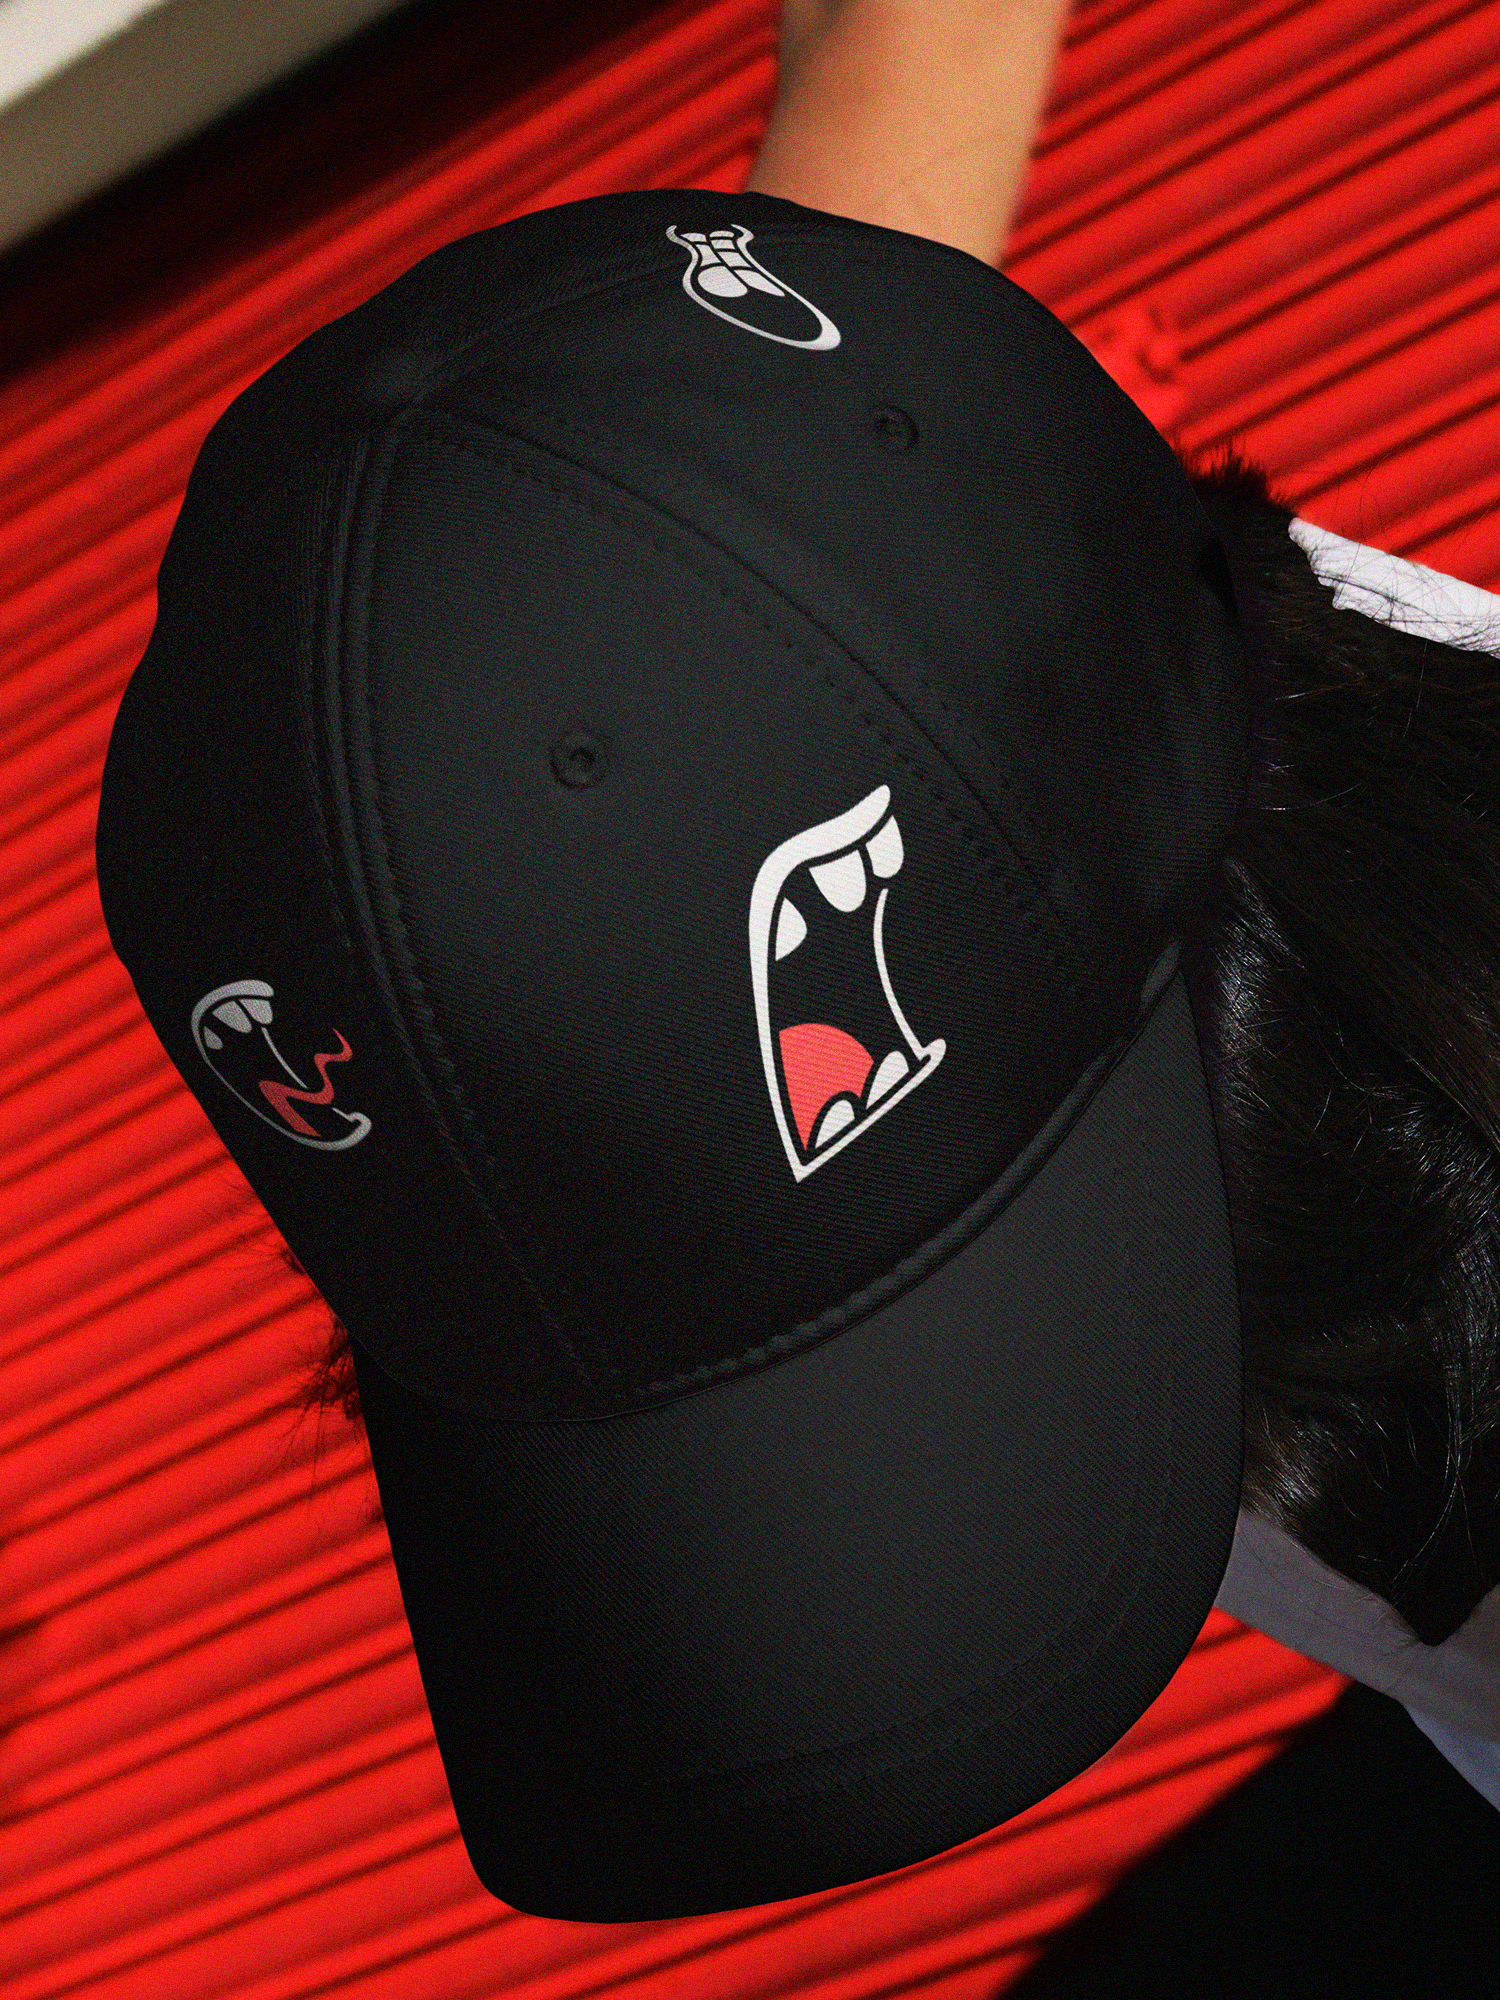 A black hat with Bite Back mouths printed in top